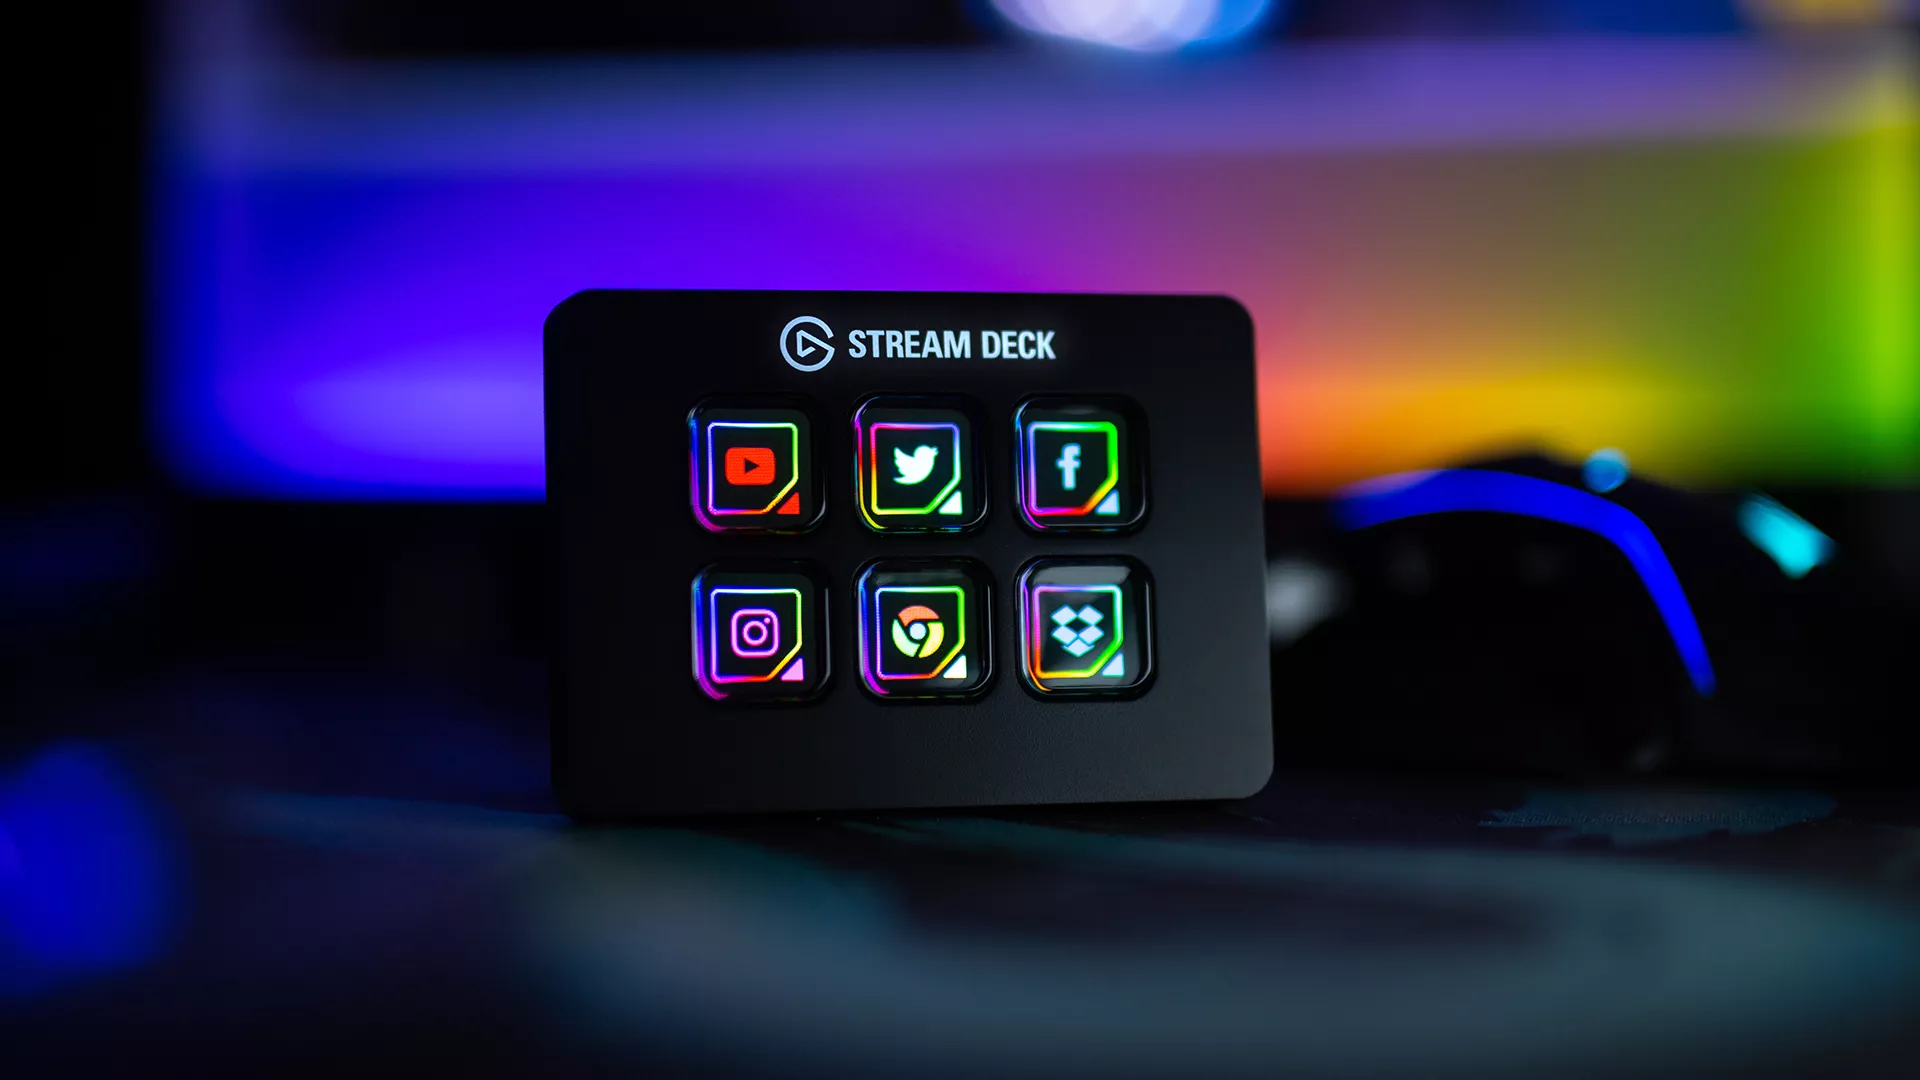 Clarity - Stream Deck and Touch Portal Key Icons - Image #1